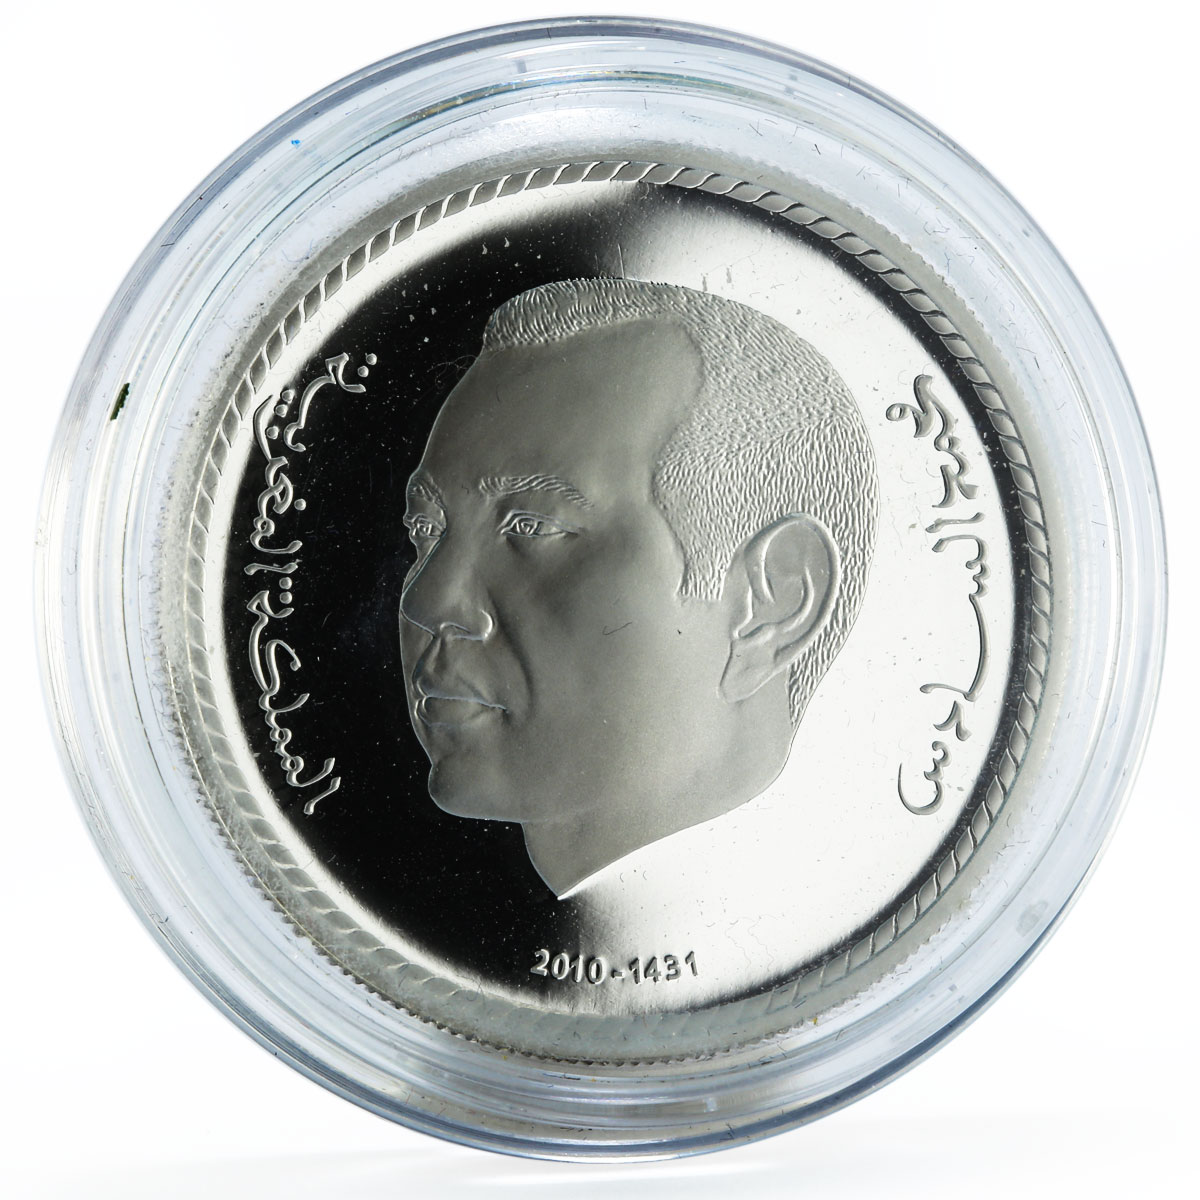 Morocco 250 dirhams 11th Anniversary of the of King Mohammed VI silver coin 2010